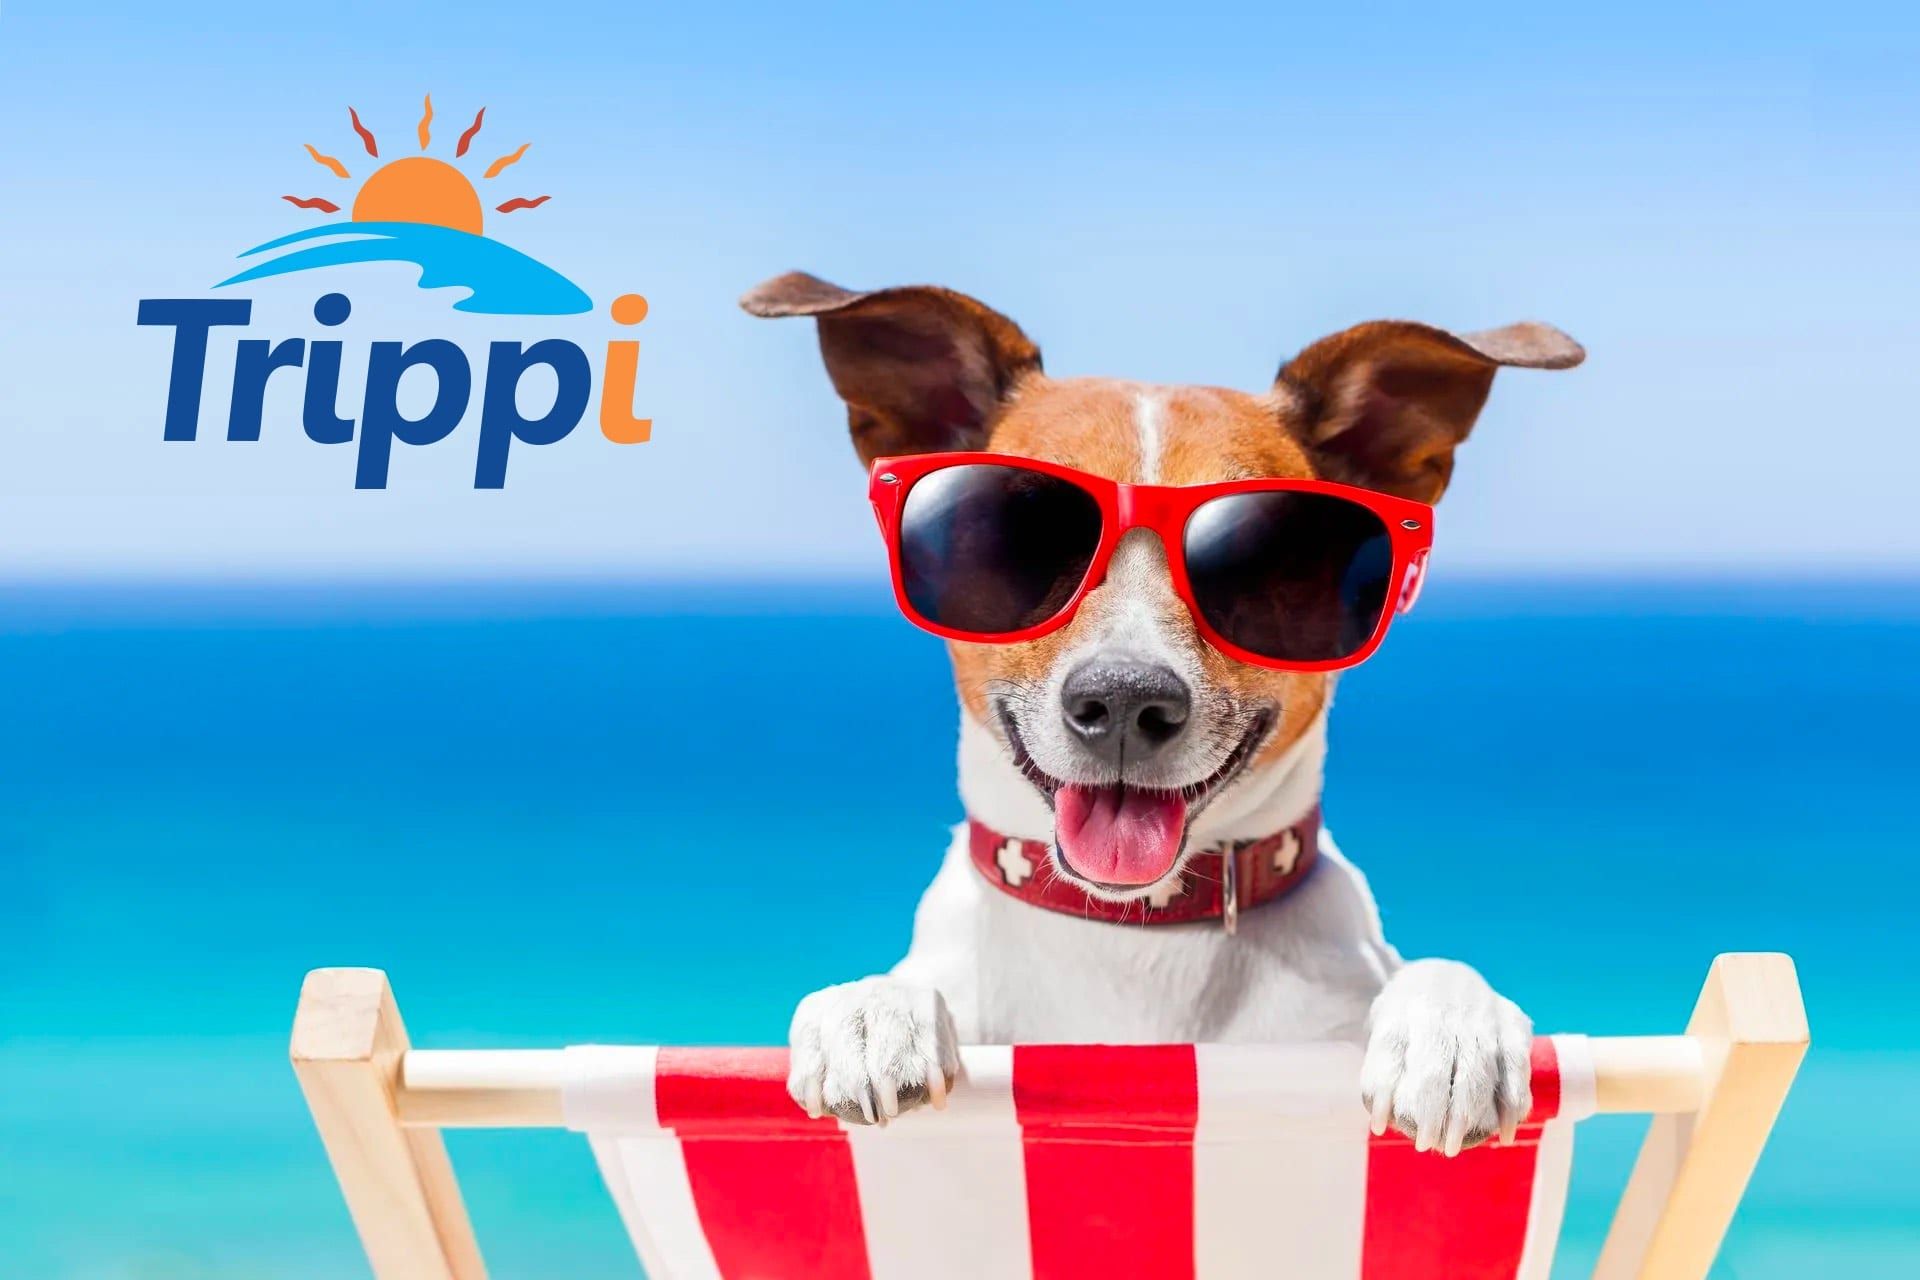 a dog wearing sunglasses sits on a beach chair in front of a trippi logo